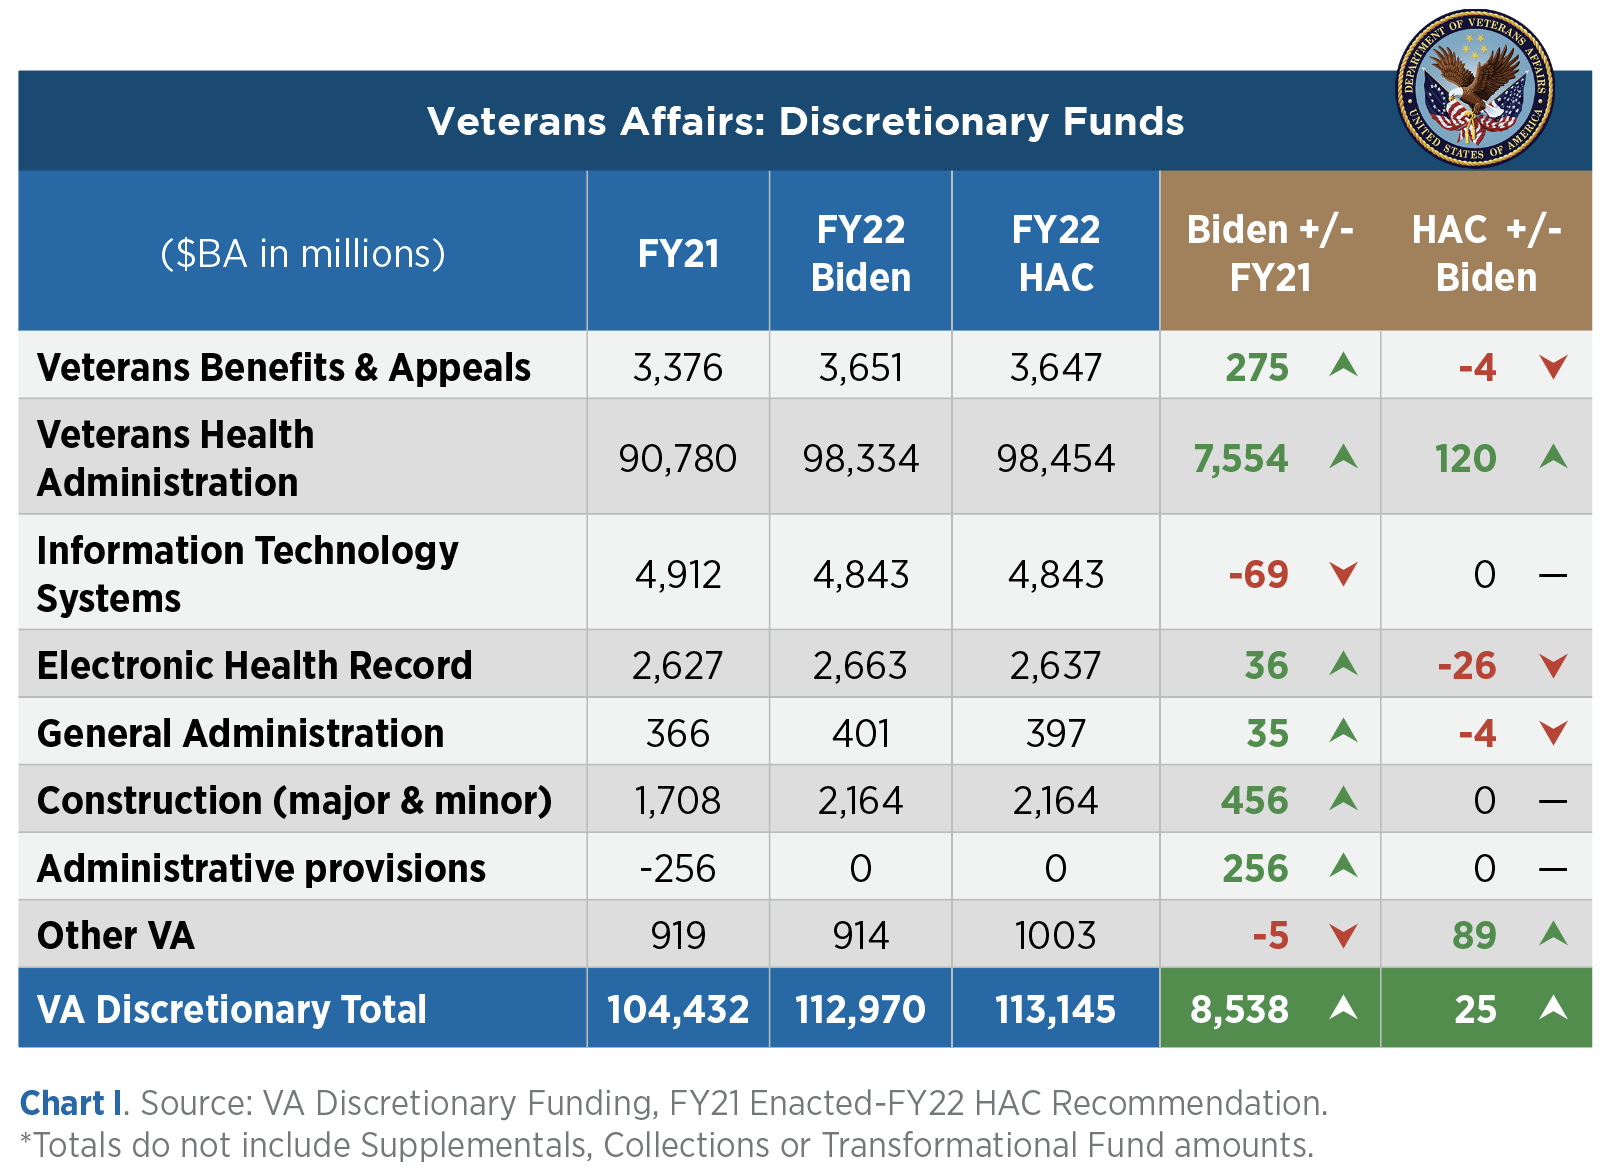 Biden S Va Budget Gets Strong Support In House Appropriations Action Federal Budget Iq